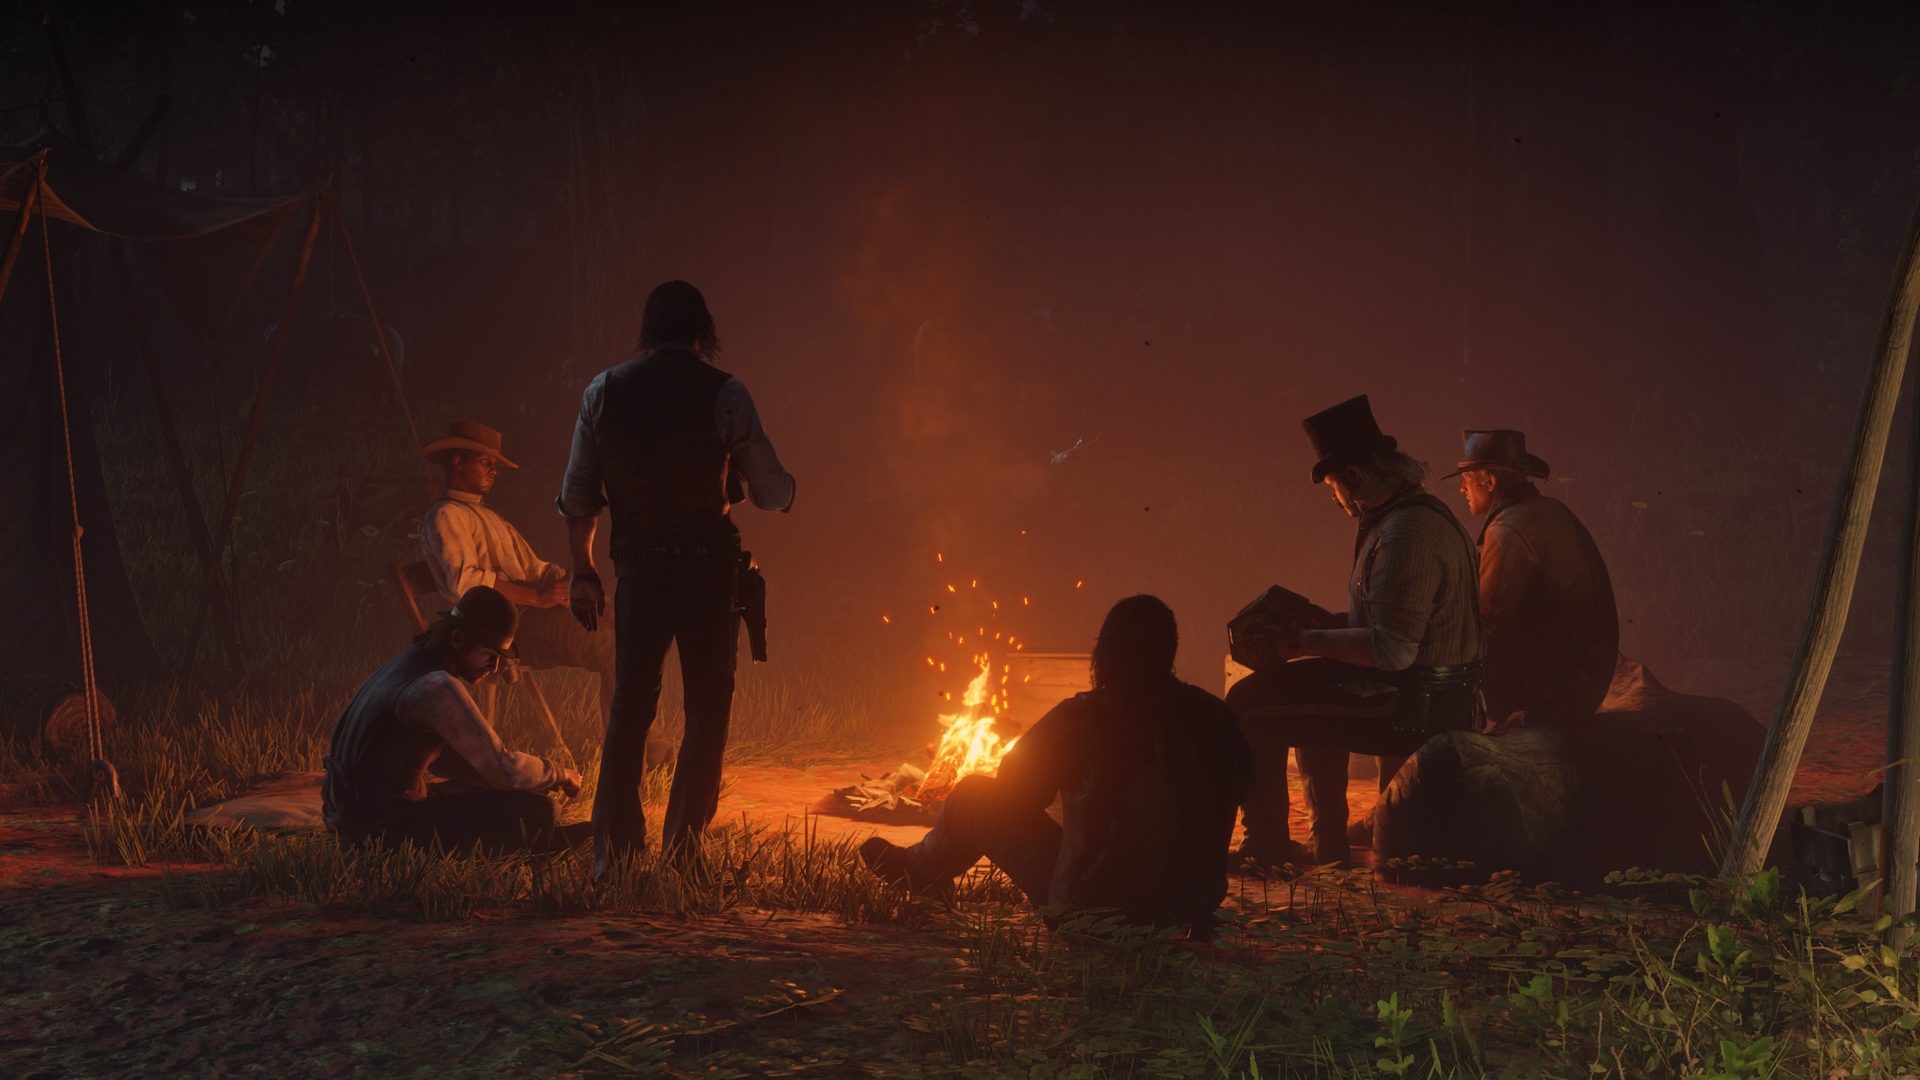 red dead redemption 2 pc free download full game torrent